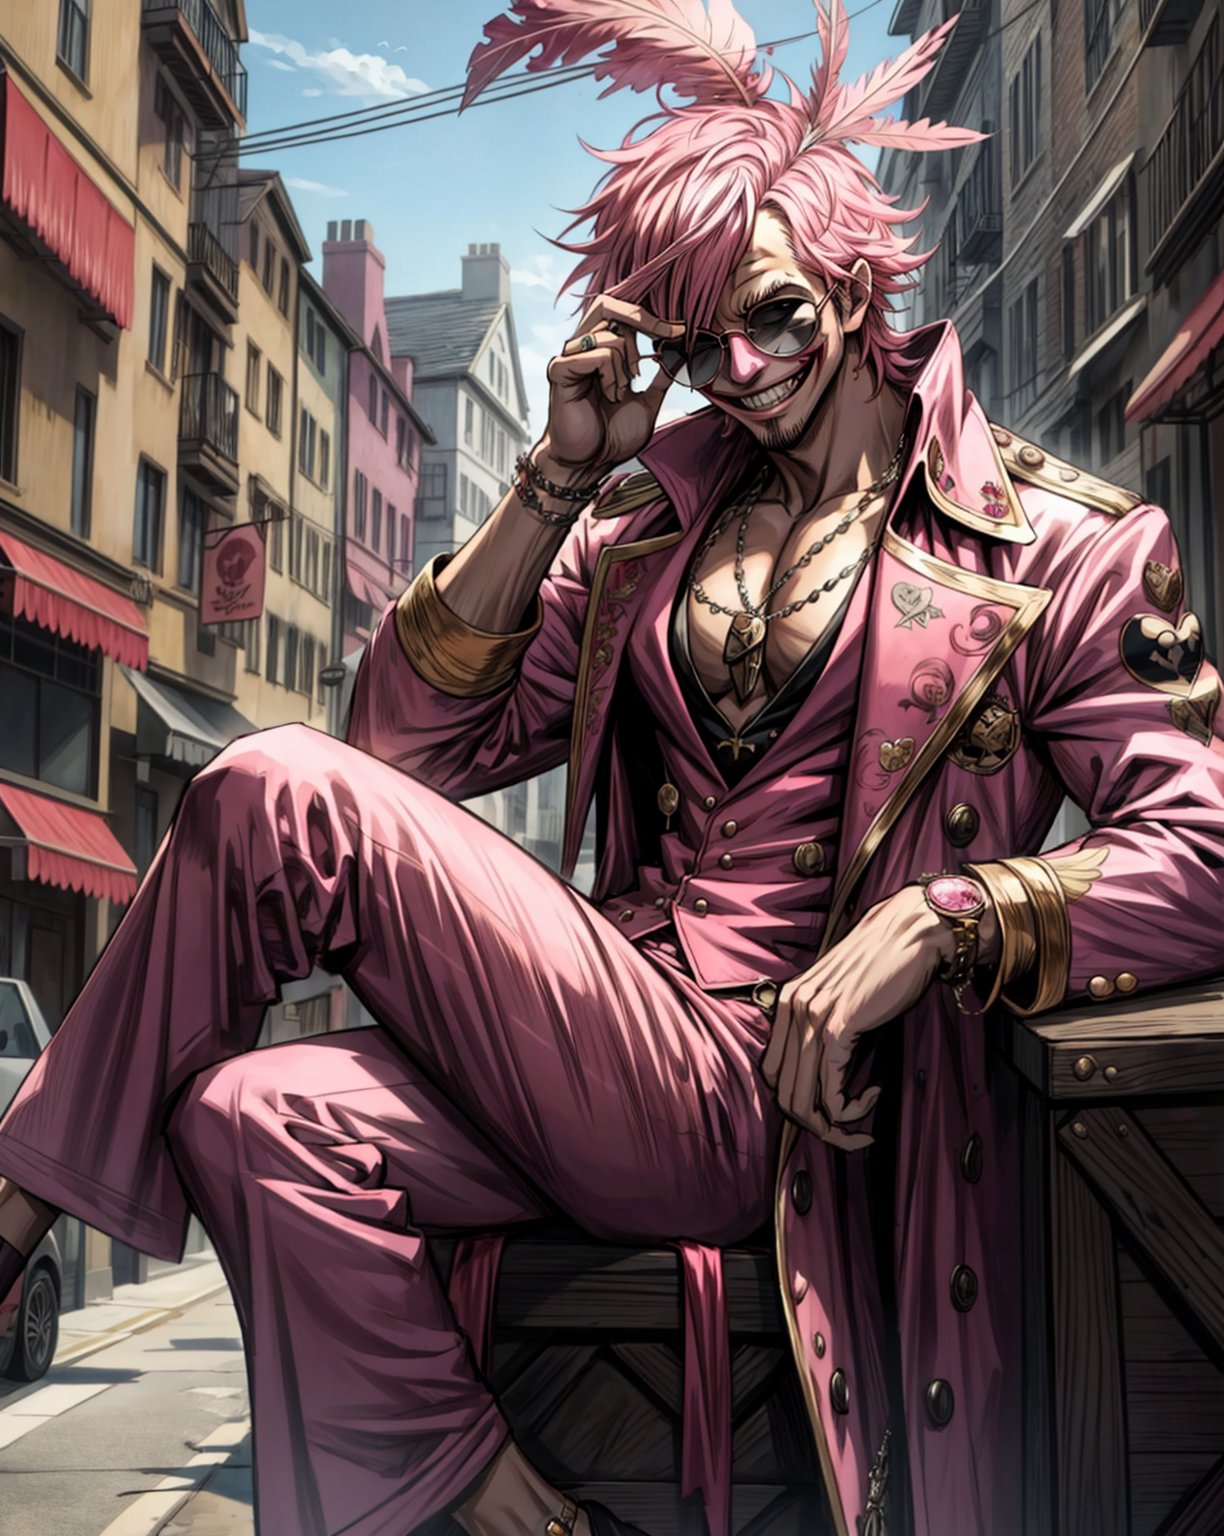 Best Quality, Masterpiece, Ultra High Resolution, Detailed Background, doflamingo Joker, one piece, sunglasses, pink feather jacket, smile, crazy pose, sitting in a pirate ship, street background, dynamic view, 4k Best Quality